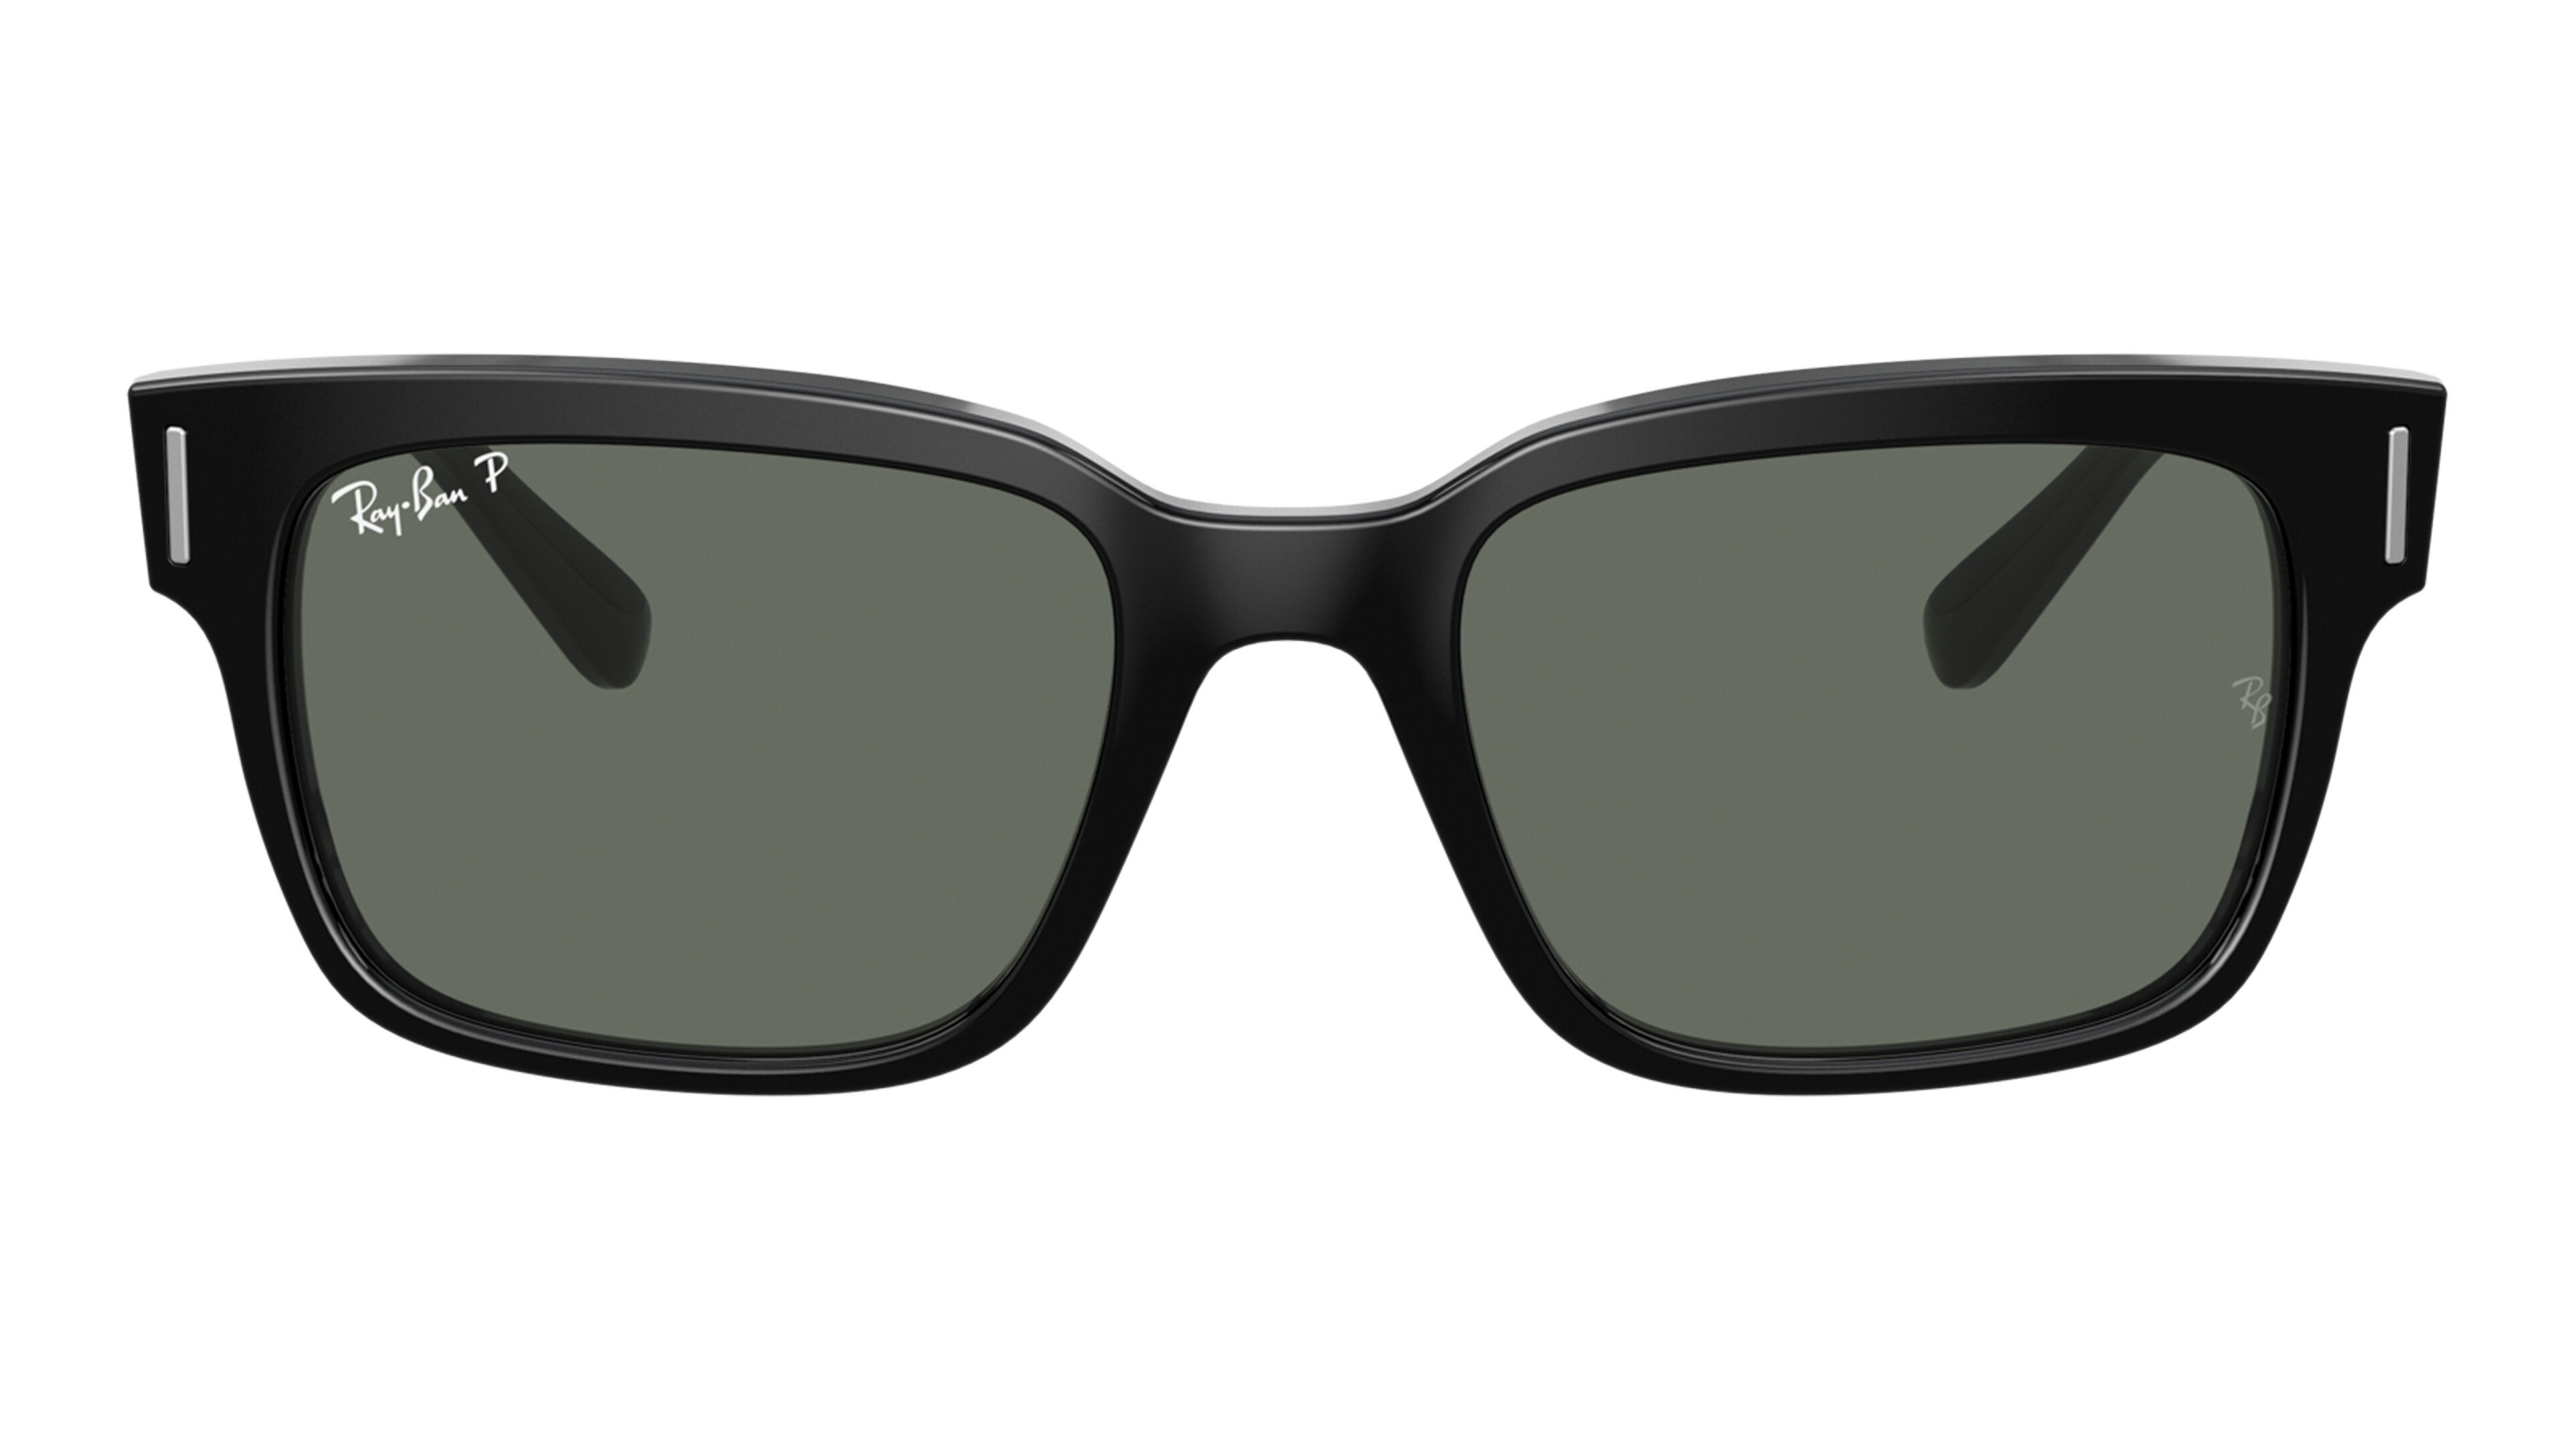 [products.image.front] Ray-Ban JEFFREY 0RB2190 901/58 Sonnenbrille